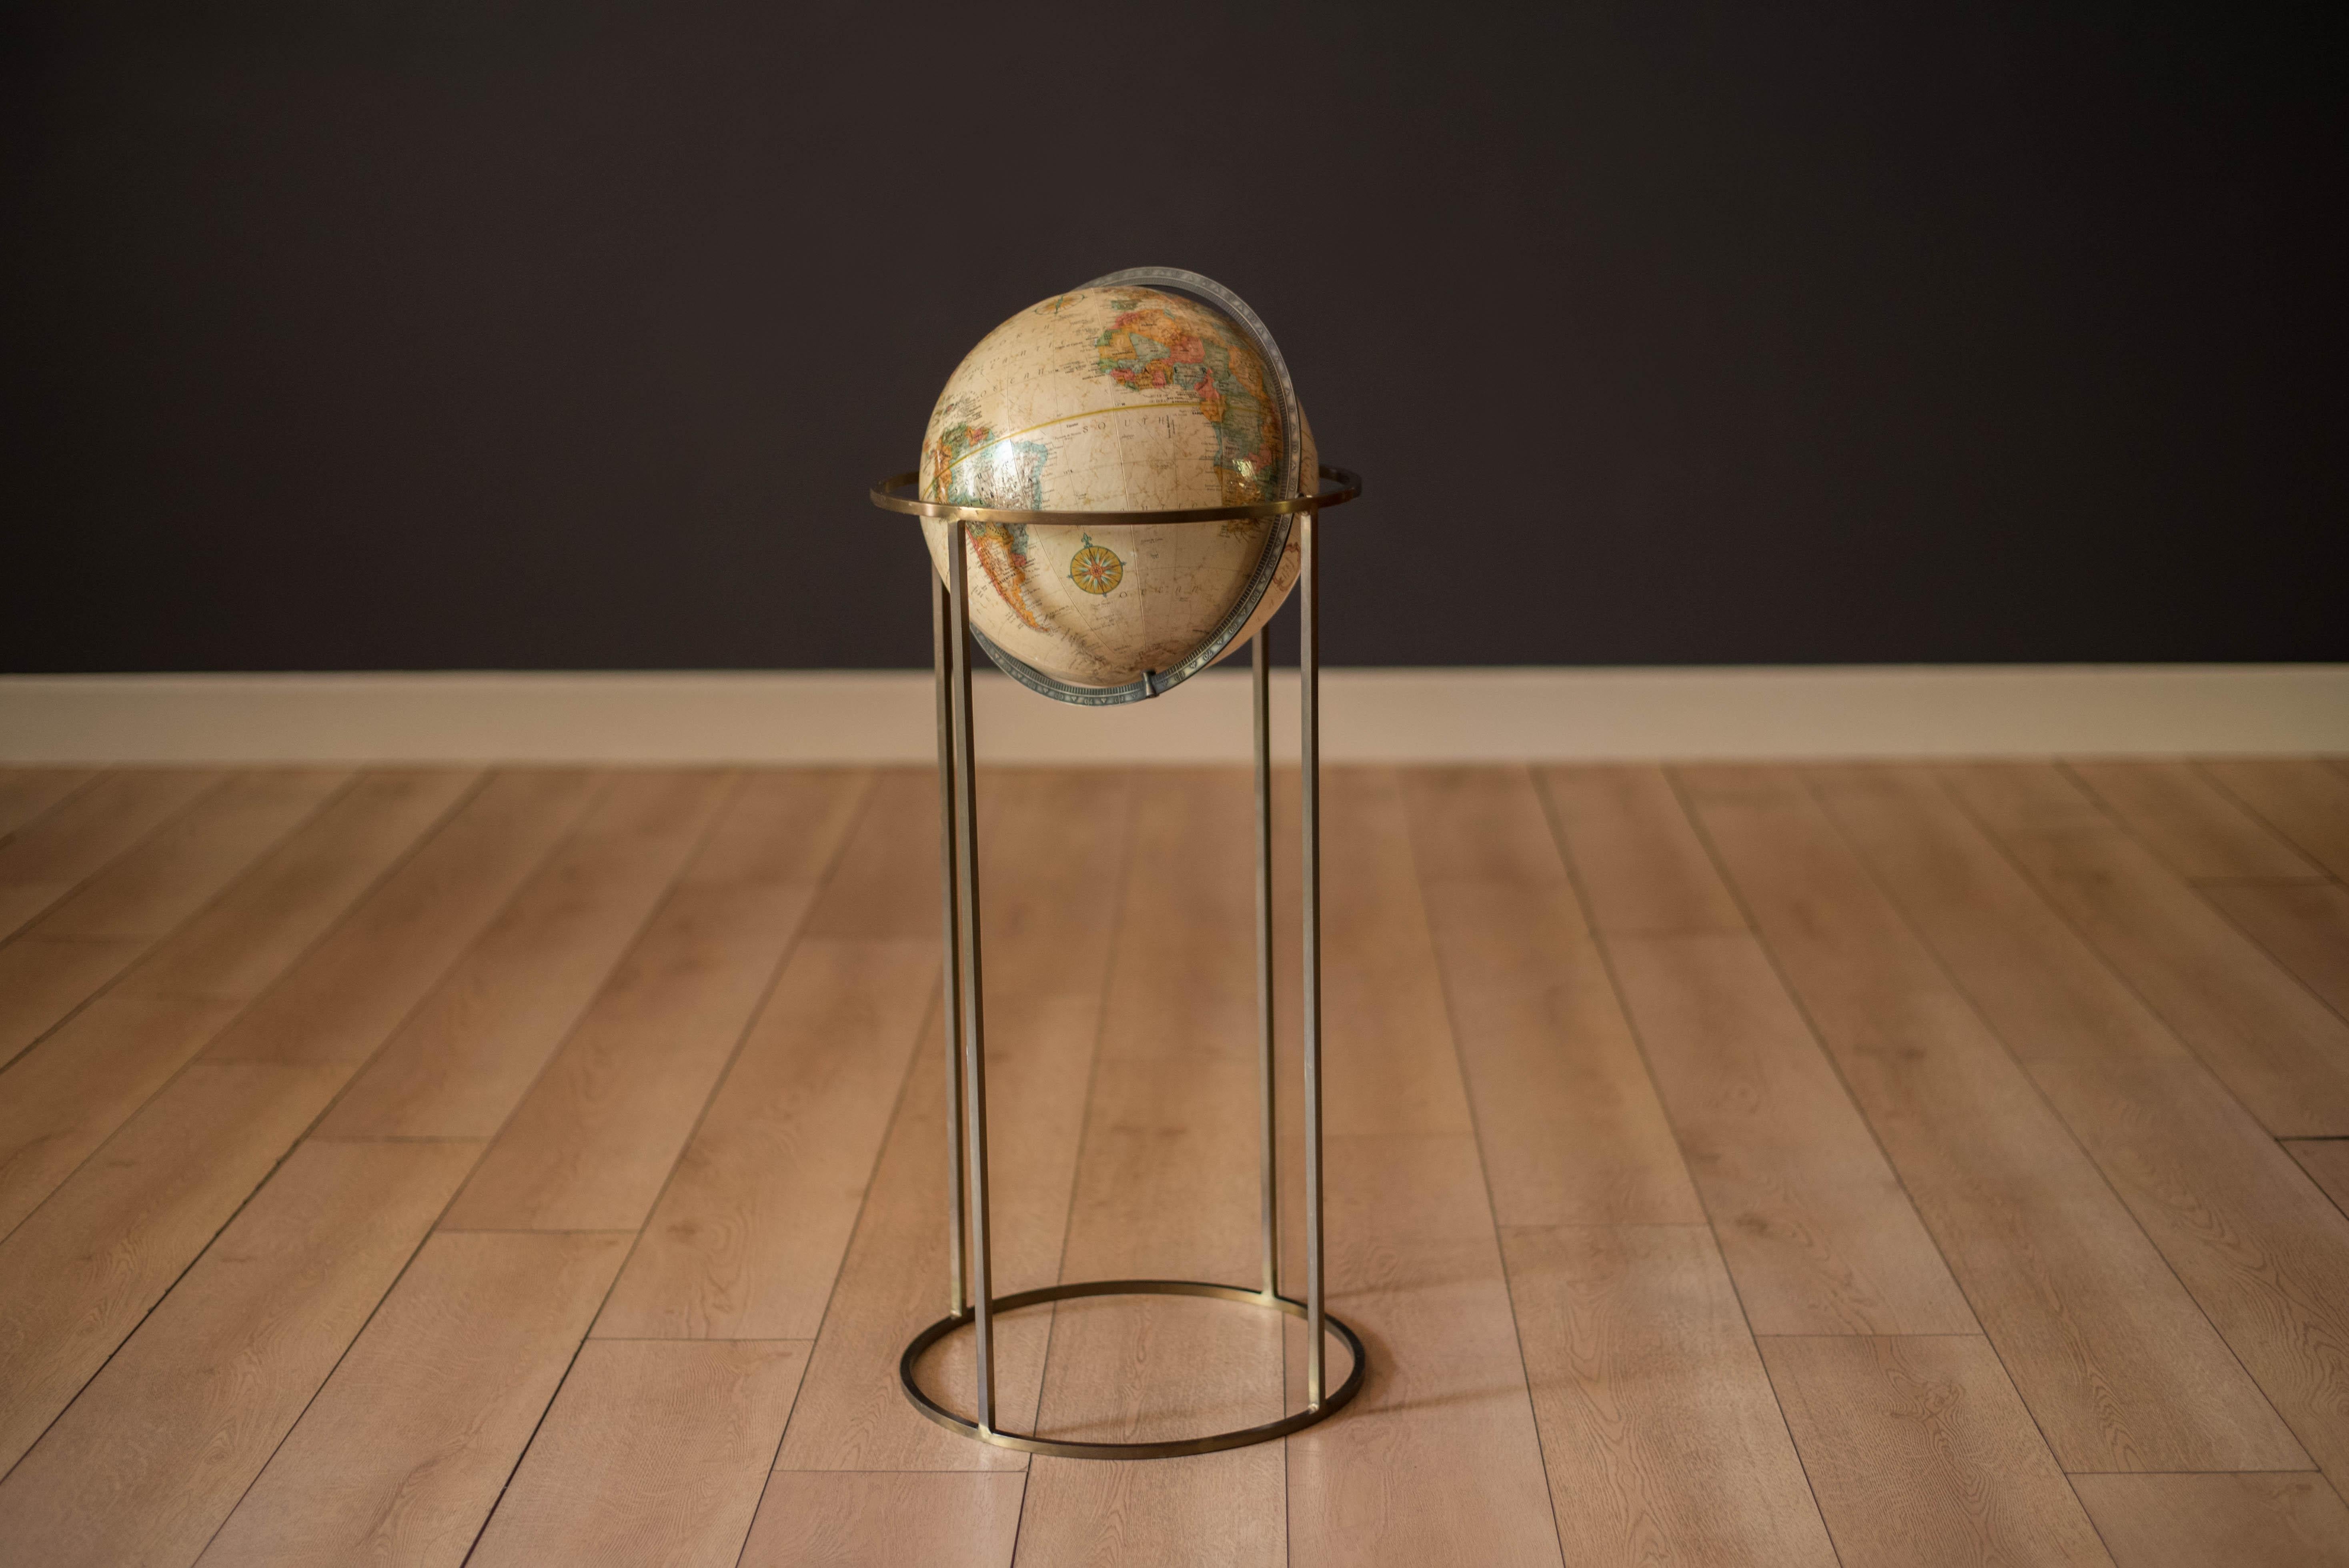 Vintage world map Replogle globe with stand in brass, circa 1970's. This piece rotates on a full swing meridian and displays plenty of vintage charm. The perfect accessory piece for any home office or library room.